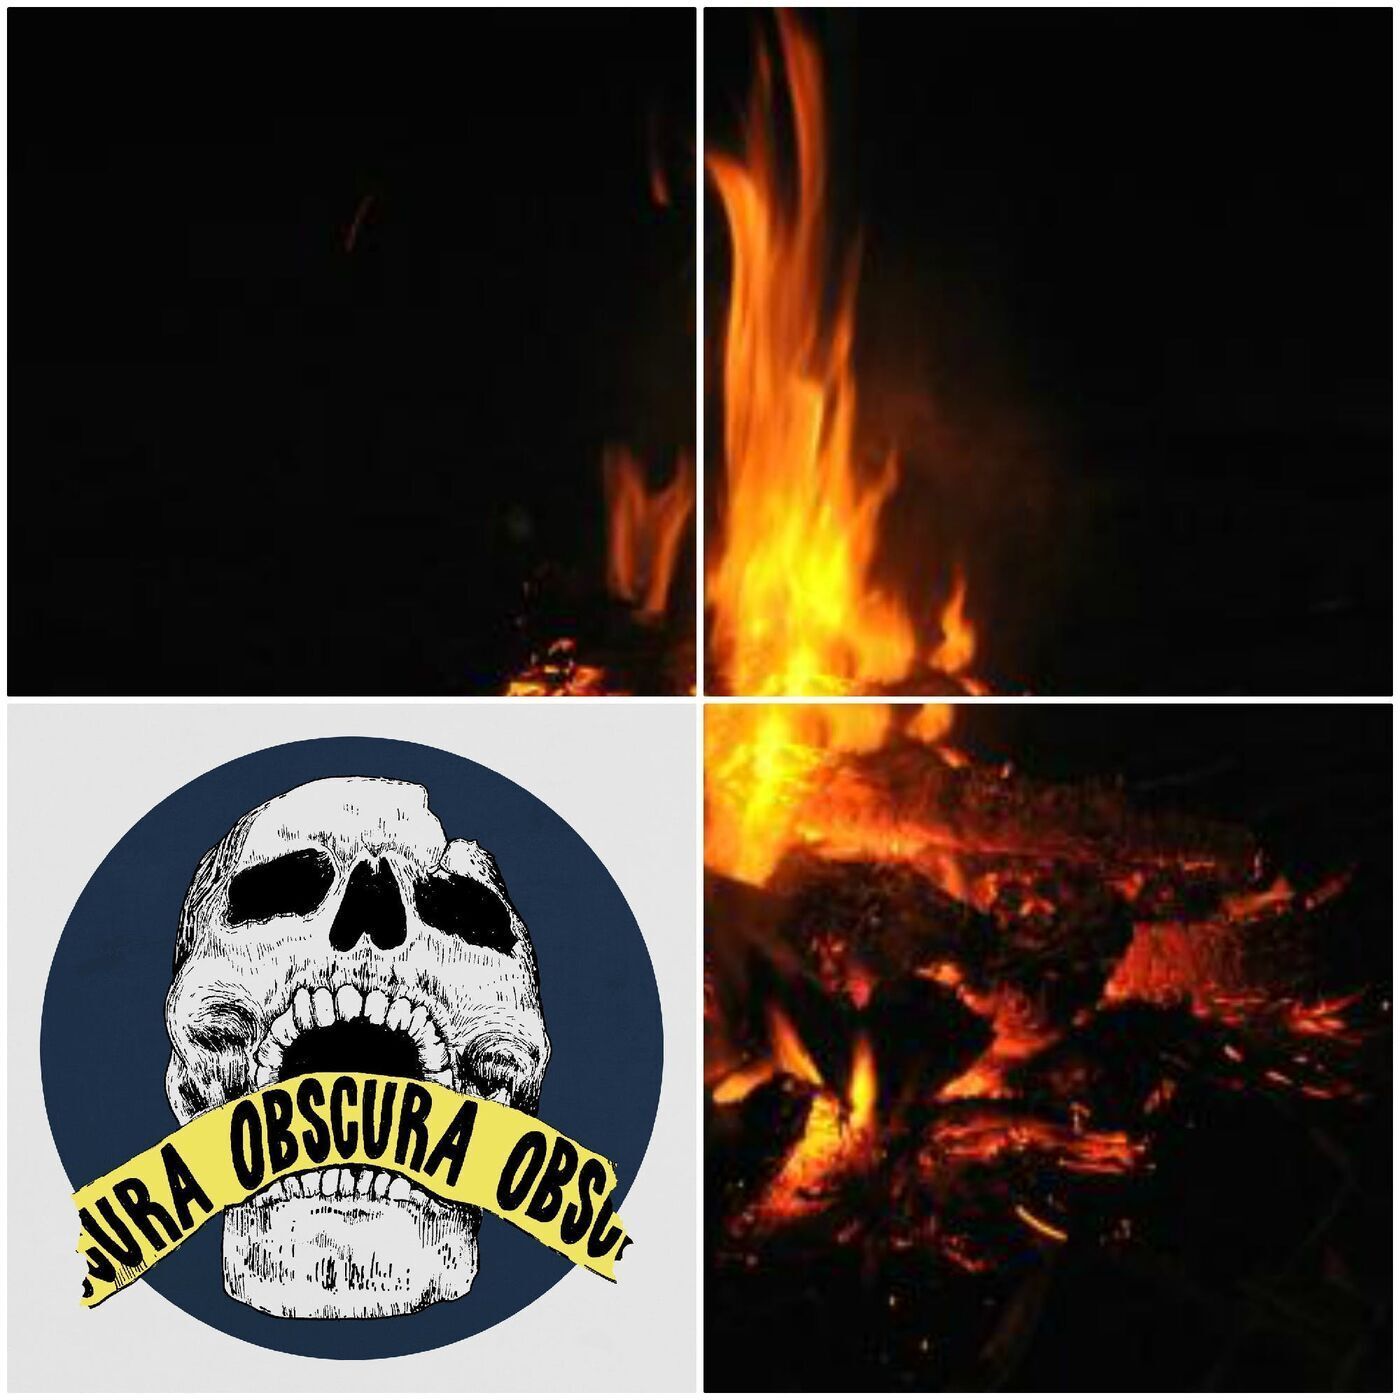 [Freebie] Fireside Chat: Behind the Curtain